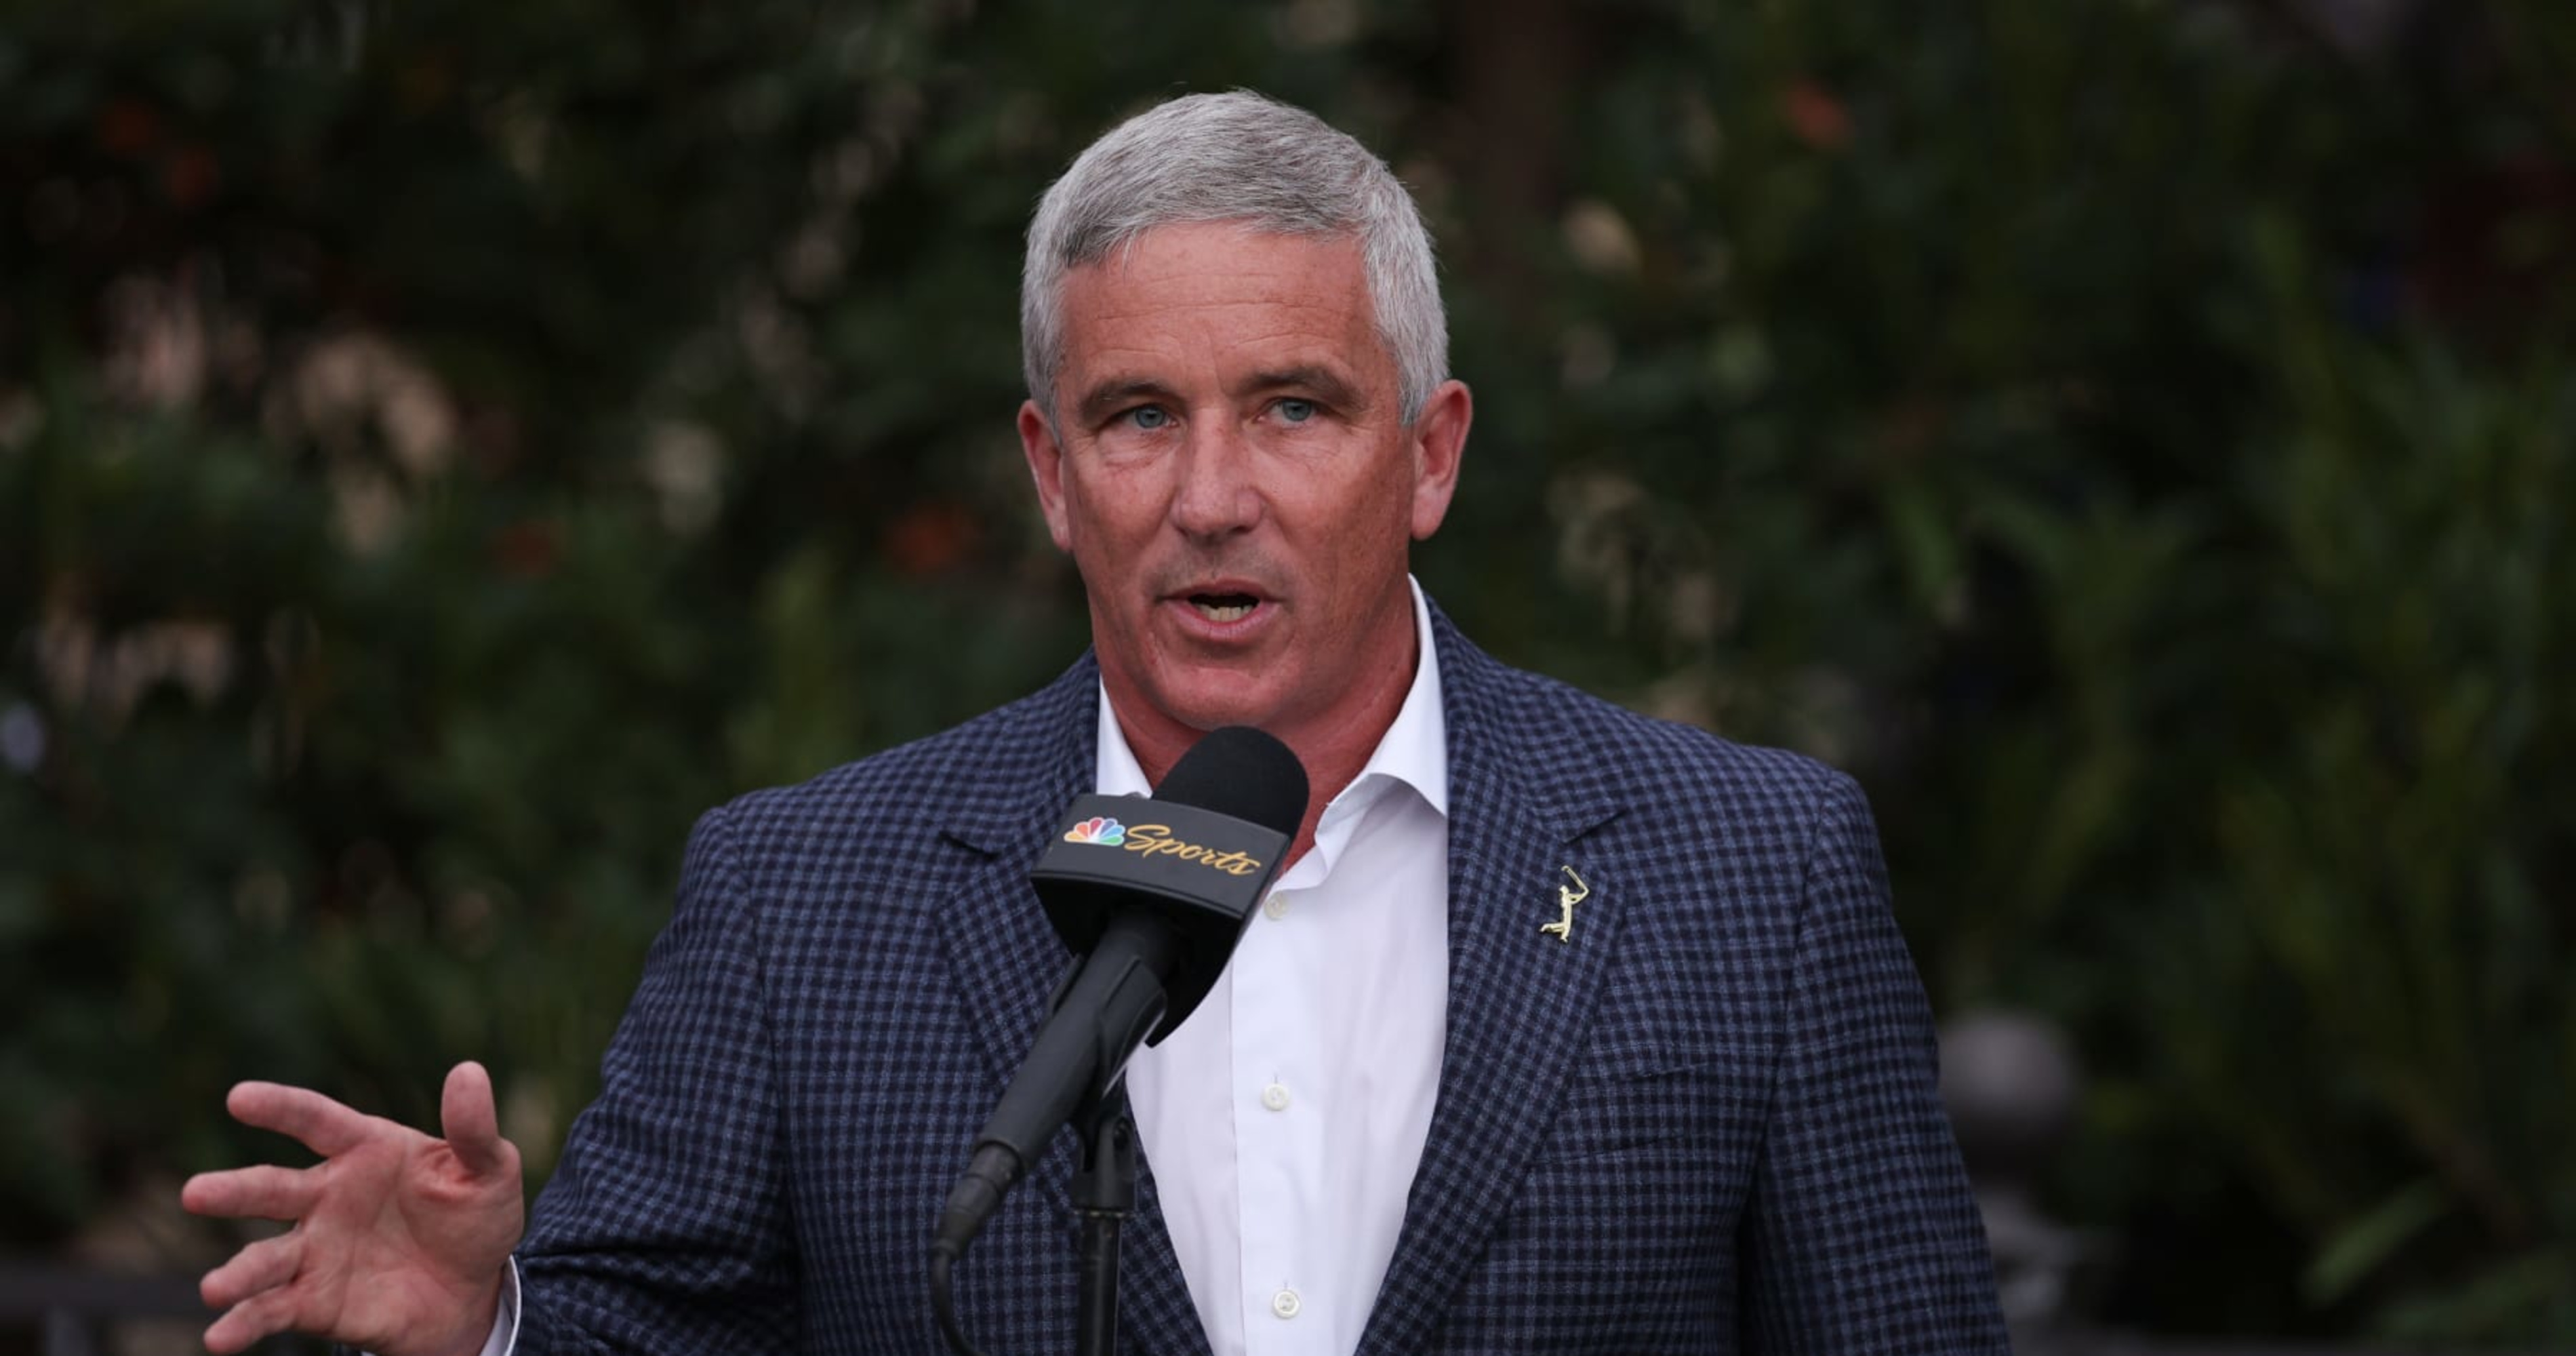 PGA Tour Commissioner Supports Legal Sports Betting